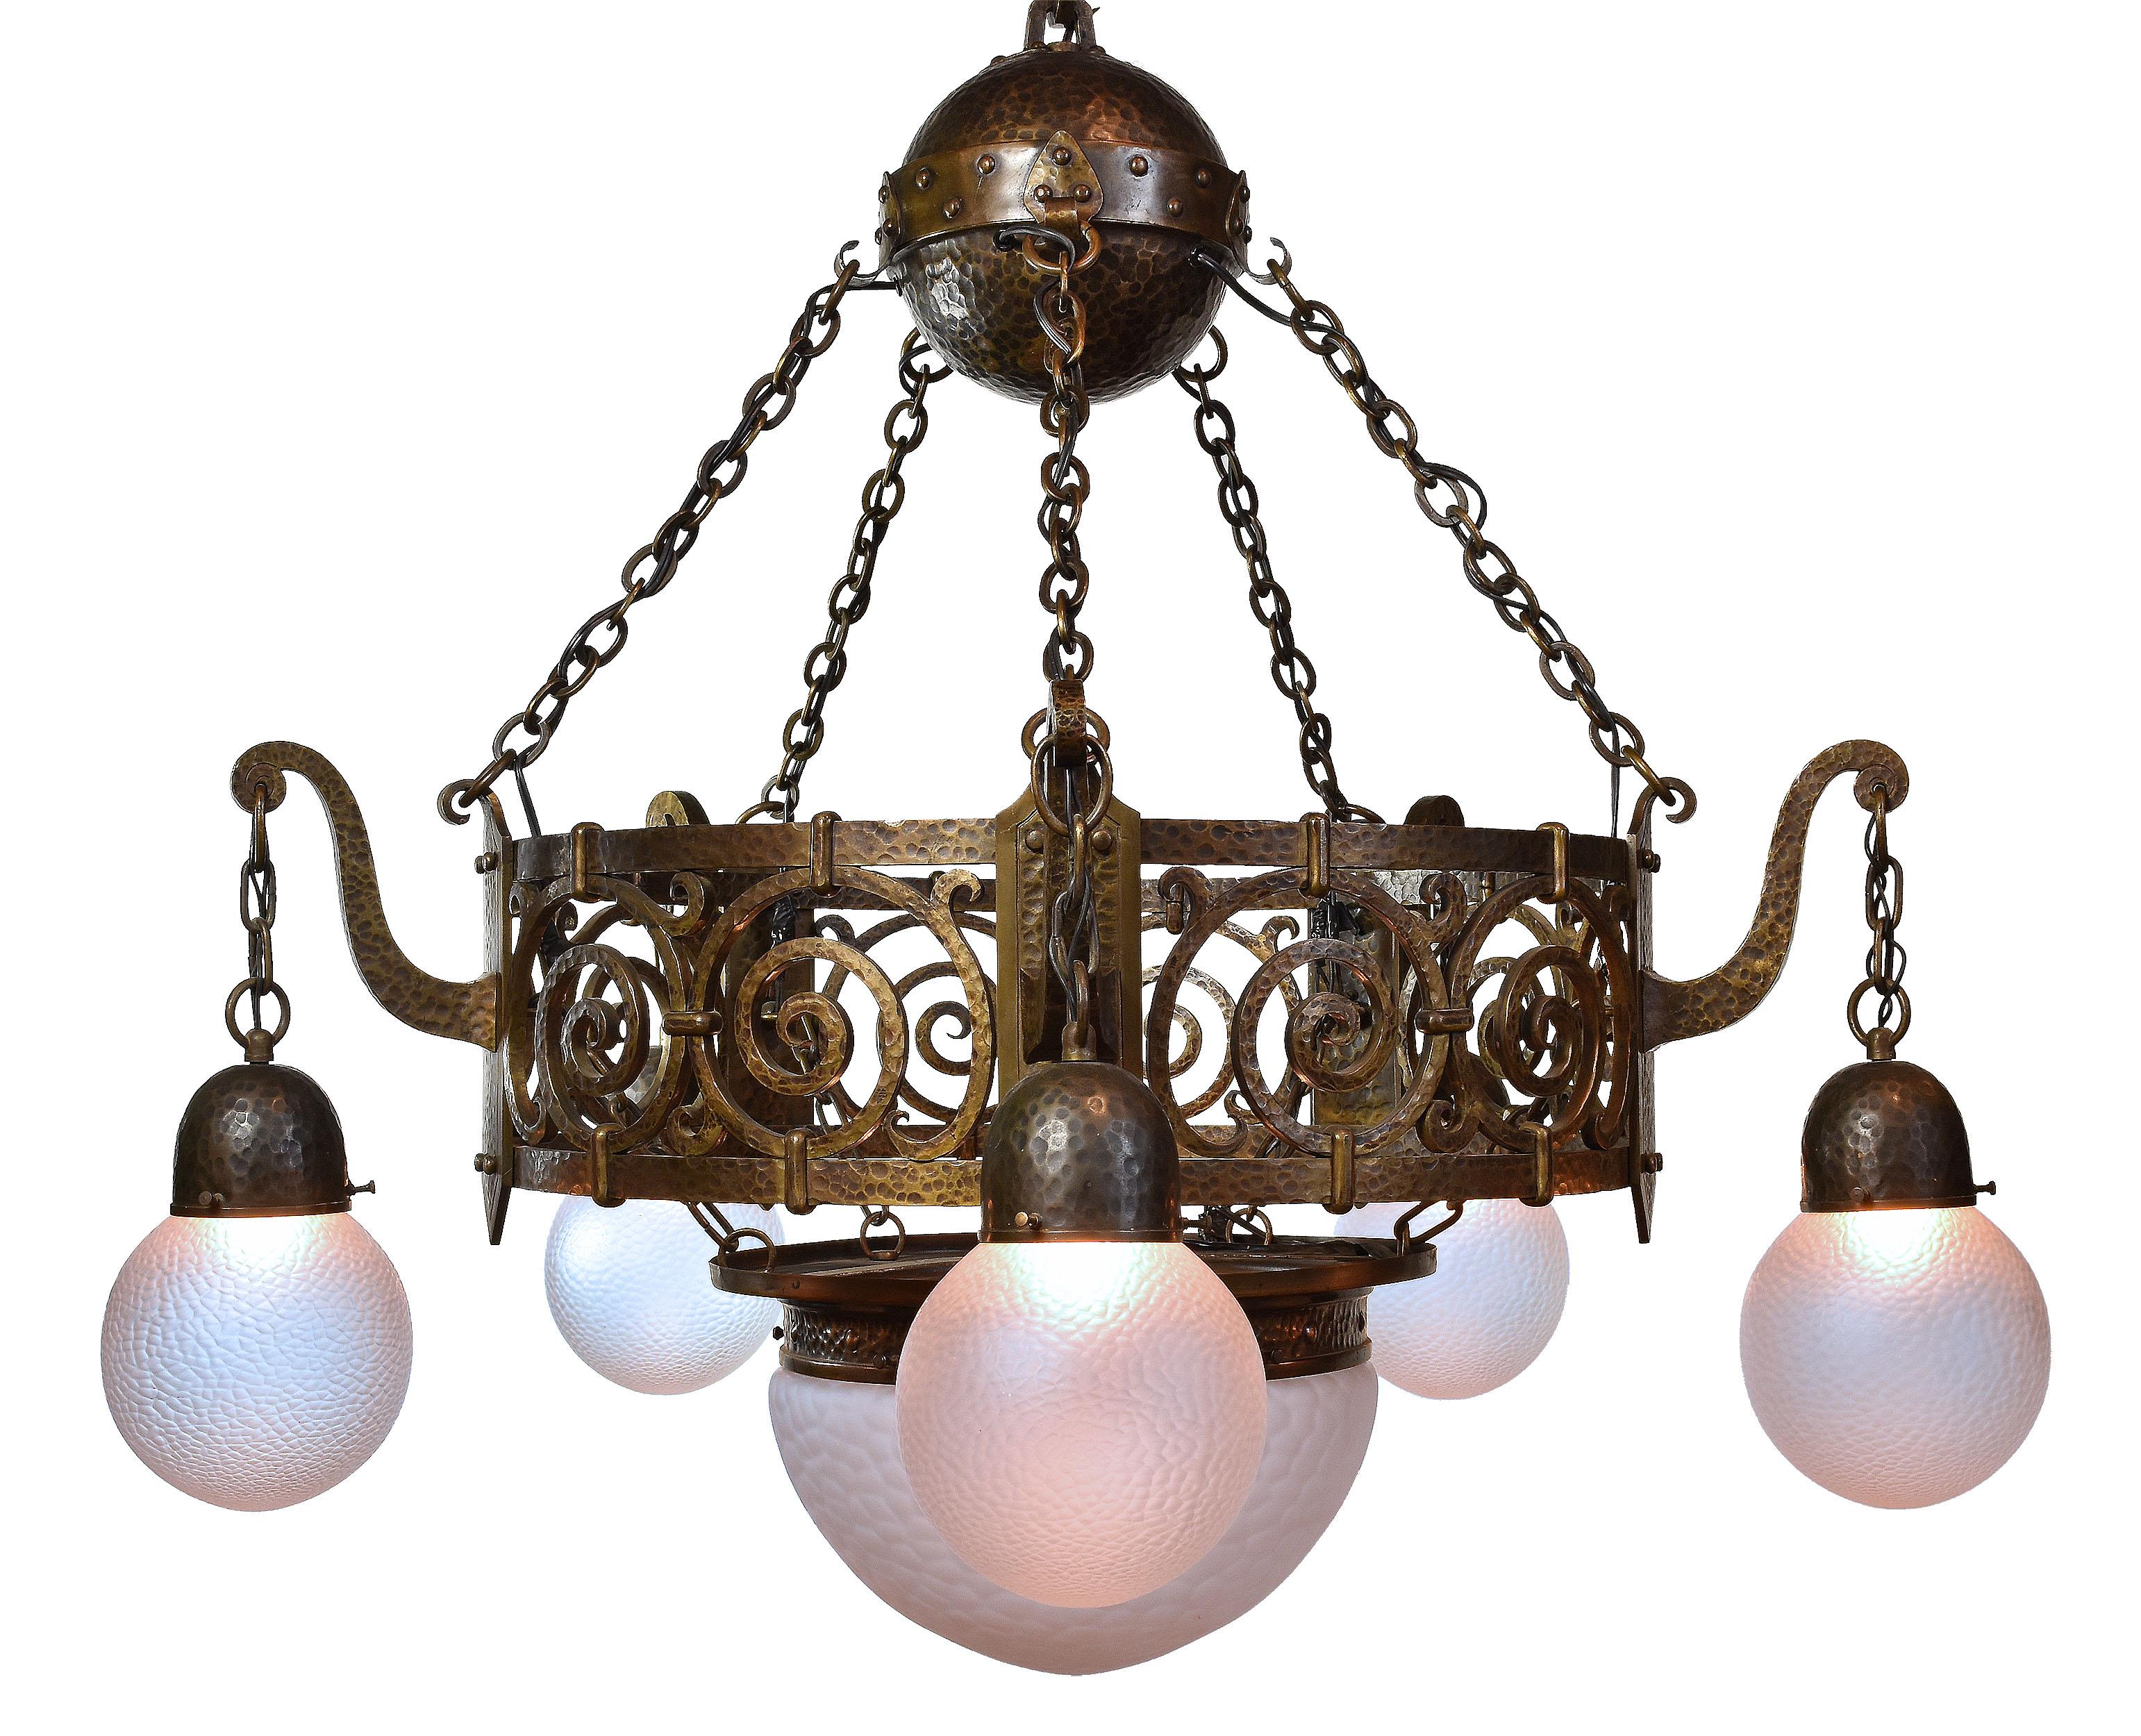 Hammered finishes were iconic of the Arts & Crafts movement which featured a high craftsmanship for everyday objects. This oversized original finish hammered bronze and brass chandelier features five matching hand blown globes that drape around a